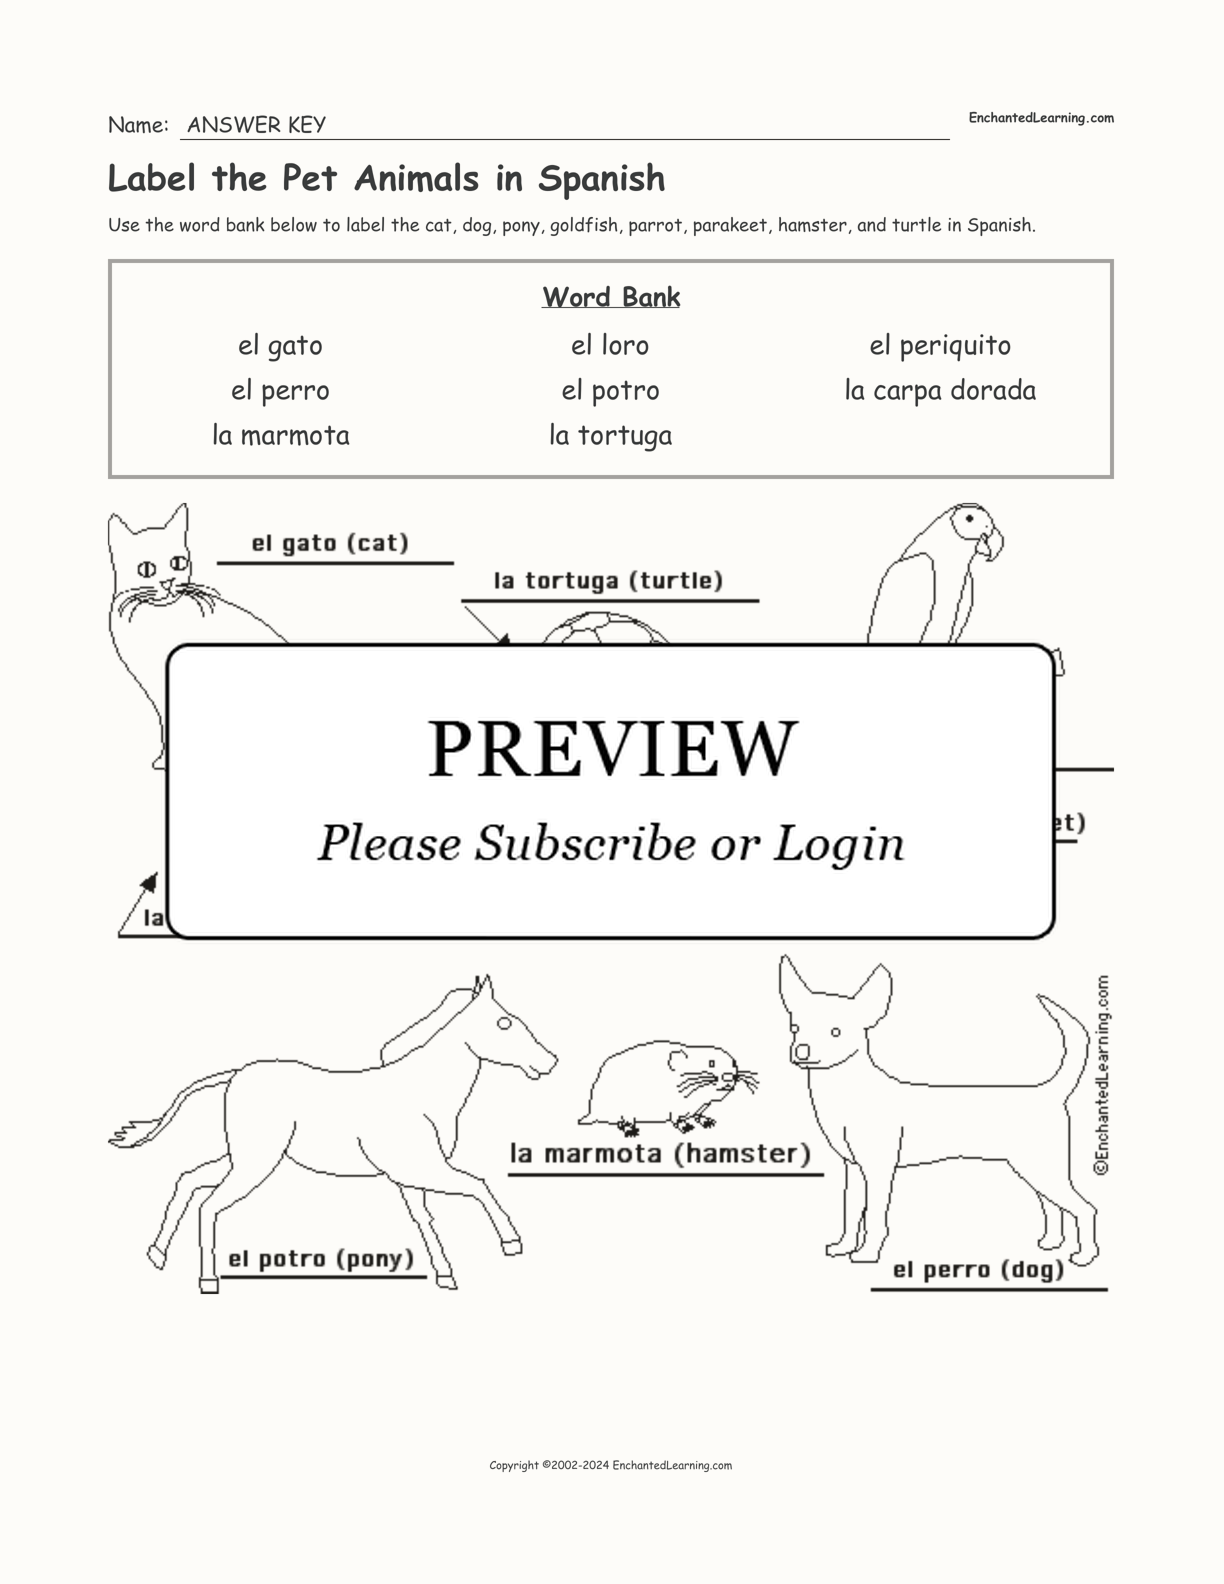 Label the Pet Animals in Spanish interactive worksheet page 2